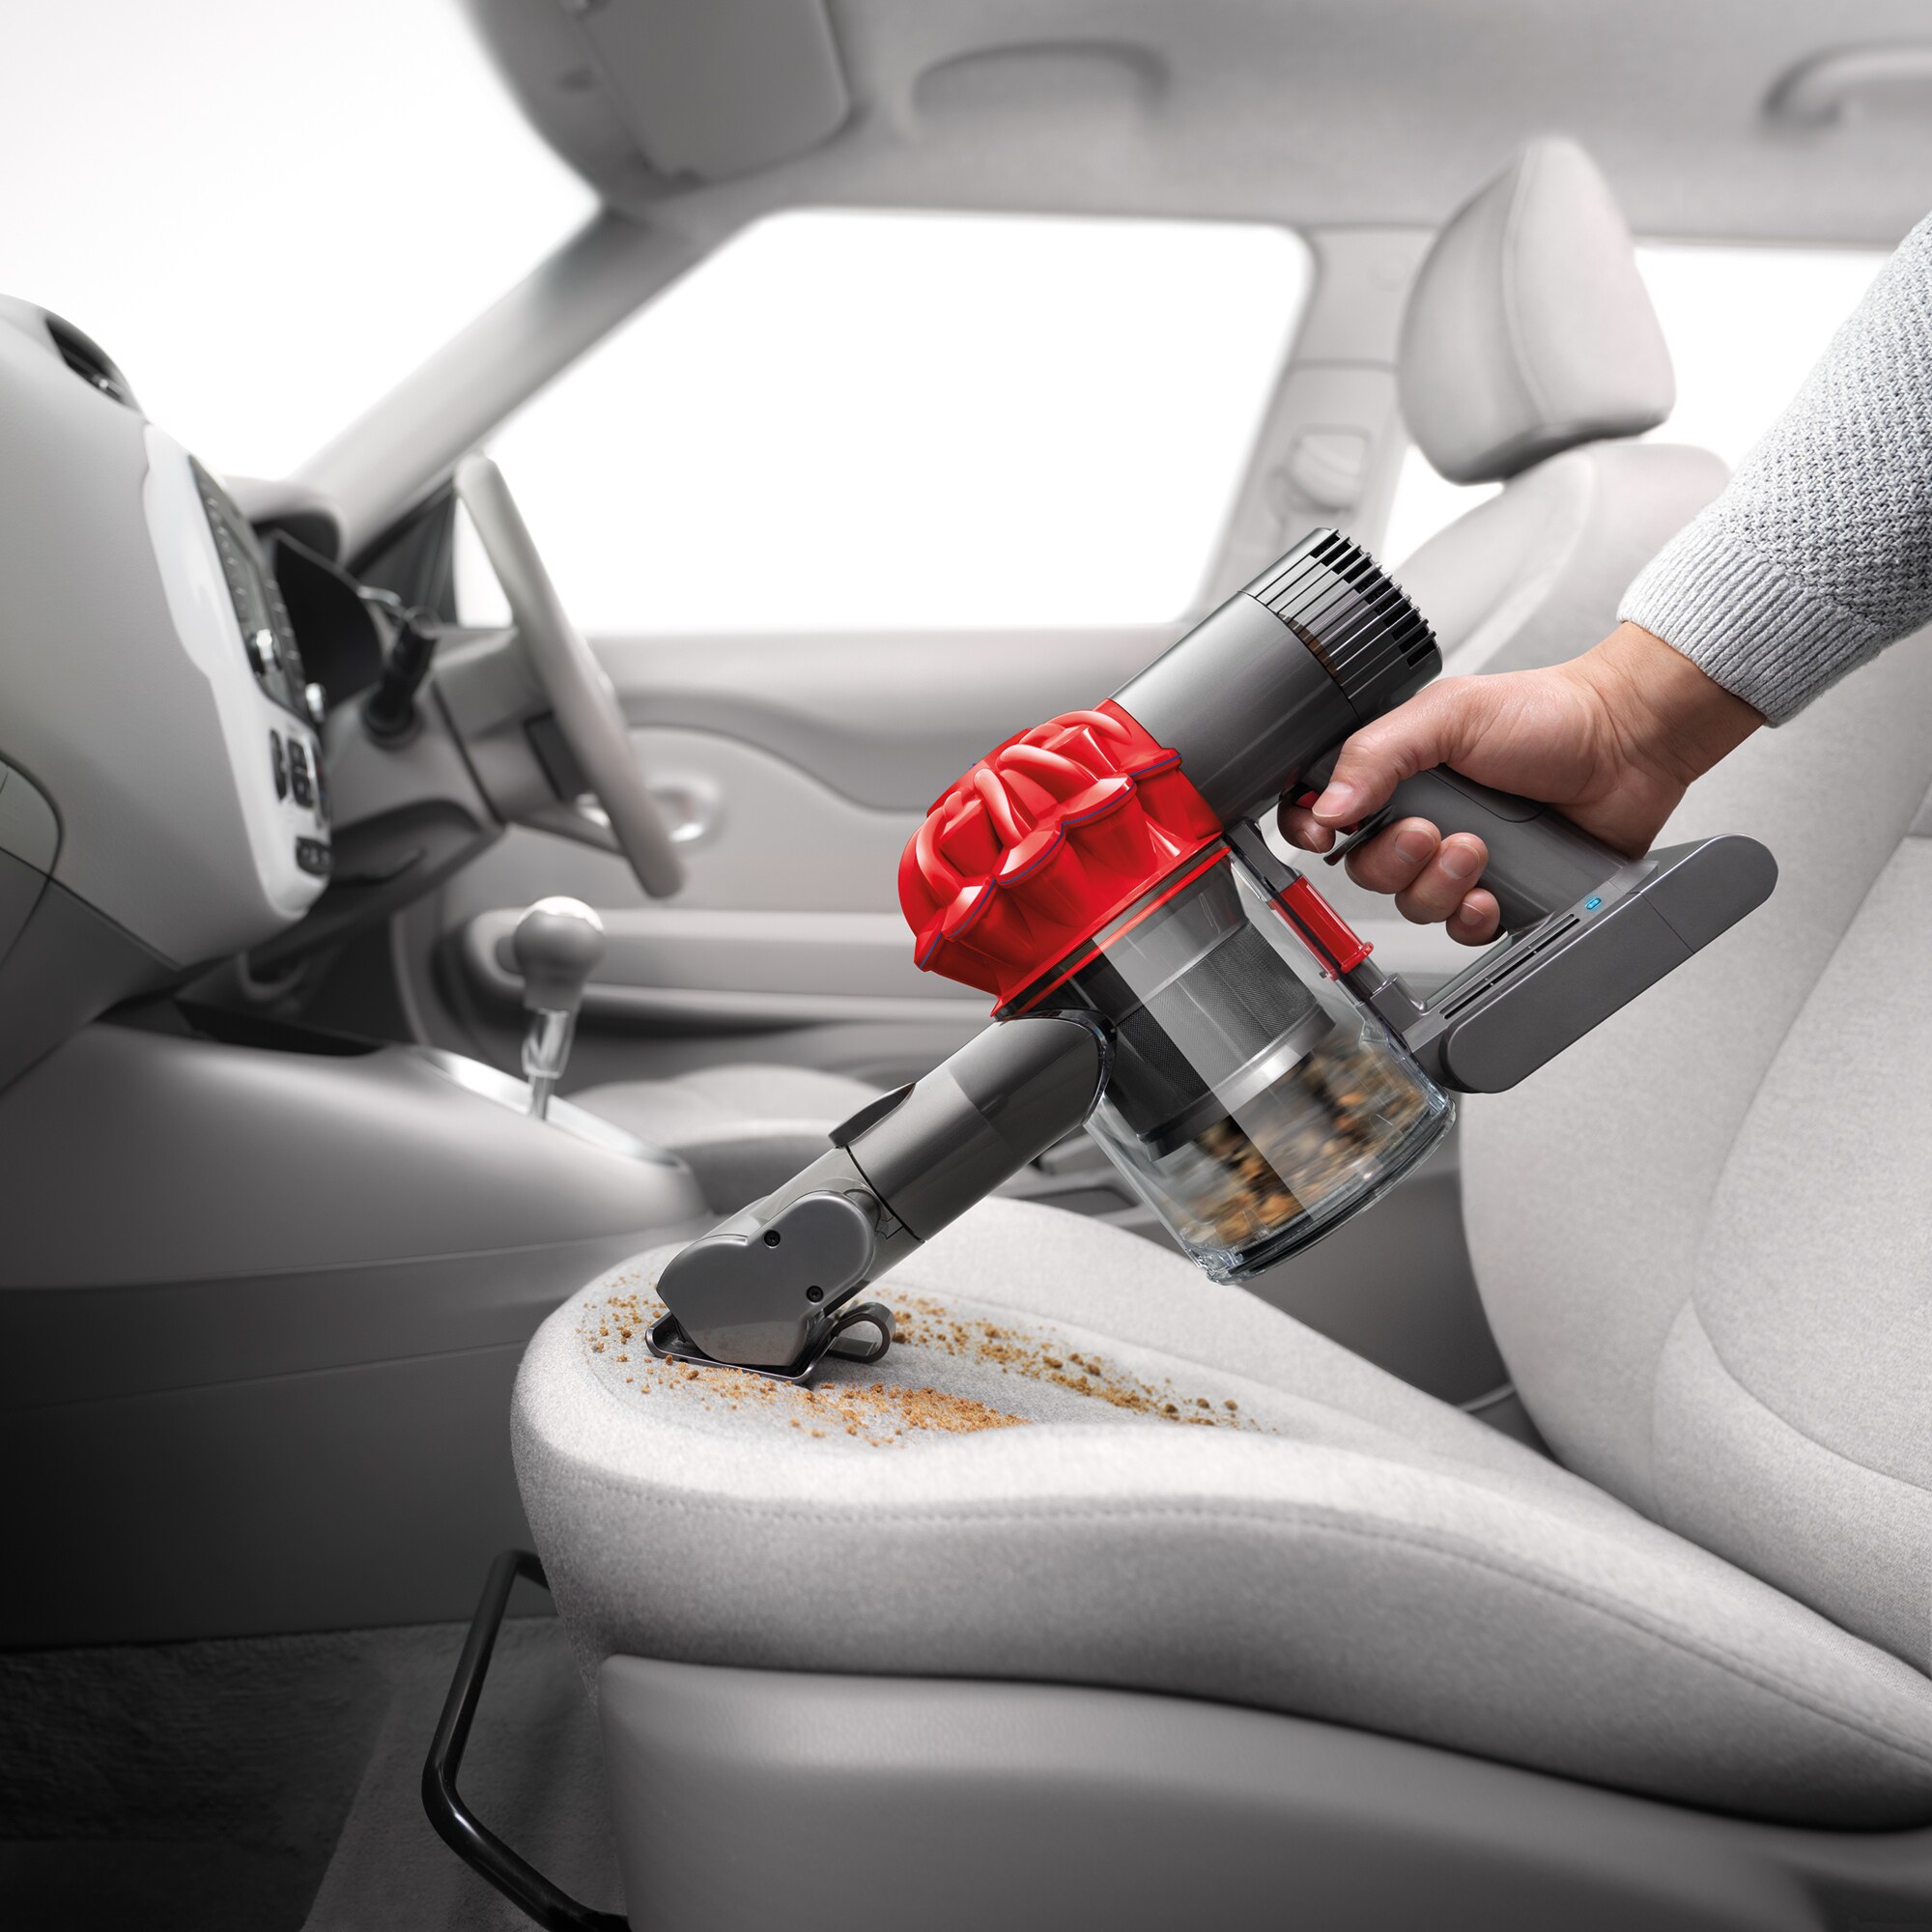 Truck Cordless Cord-Free Handheld Vacuum Cleaner Details about   Dyson V6 Car Red Boat 